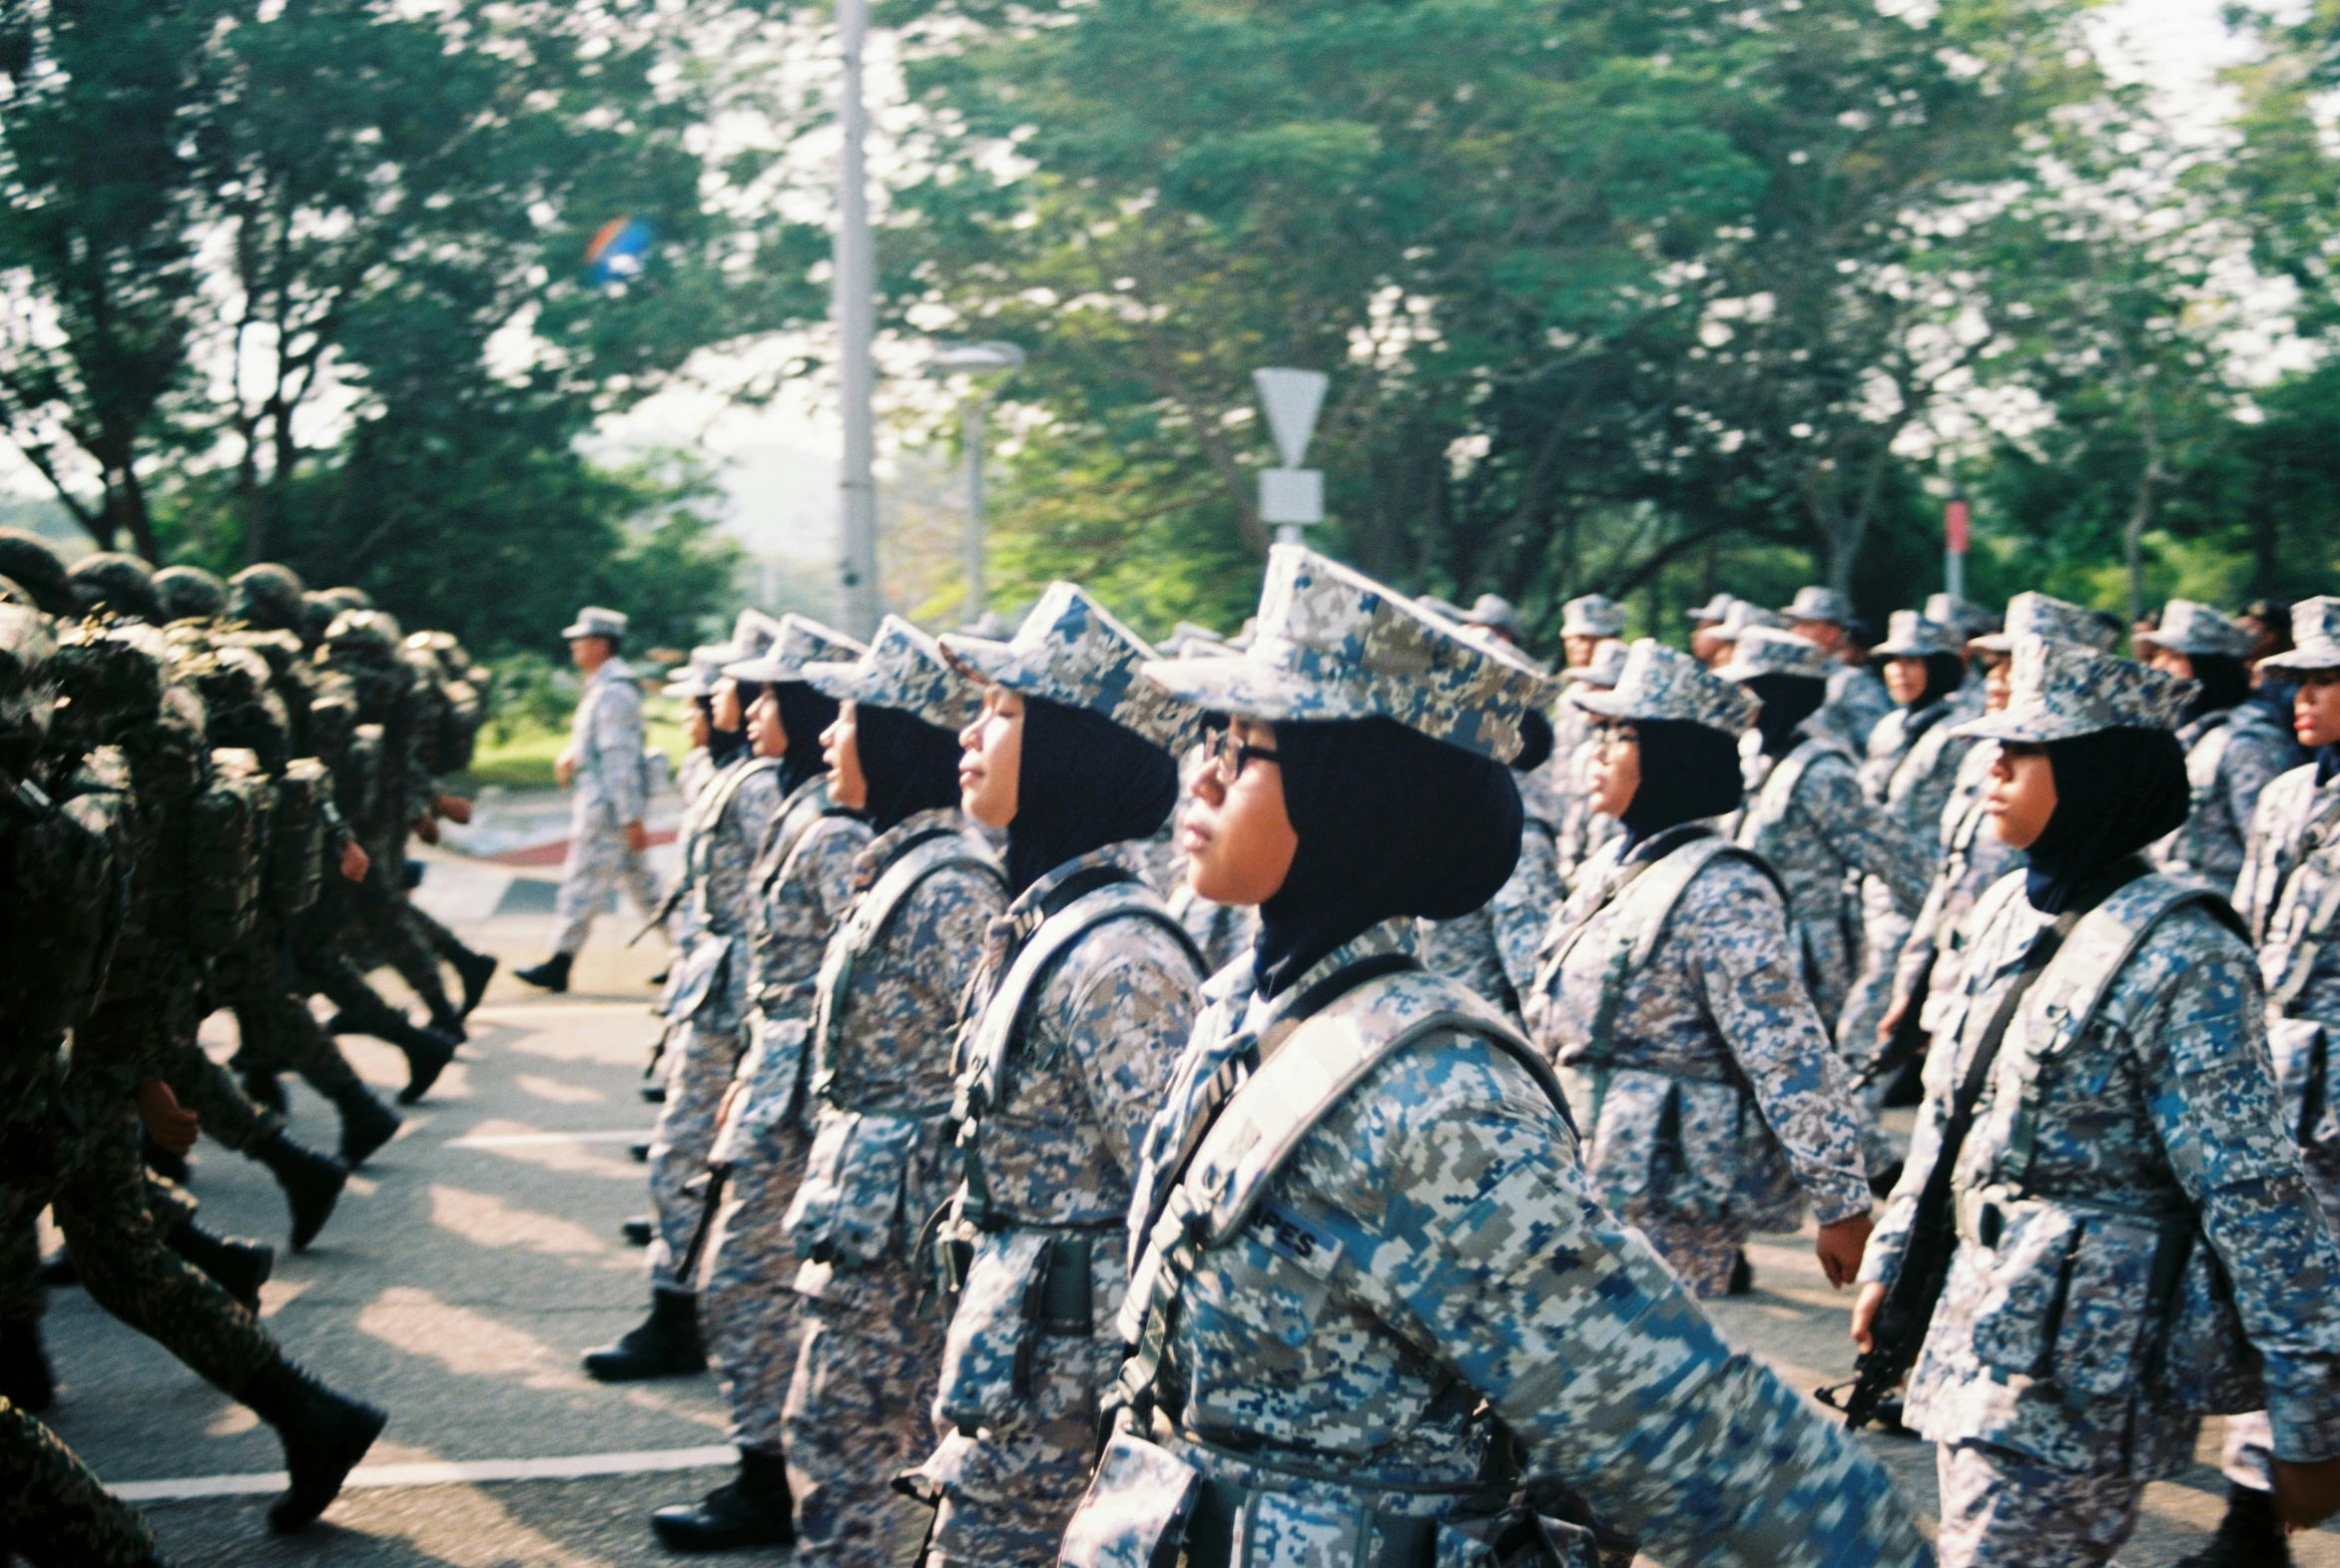 several soldiers marching together on the street